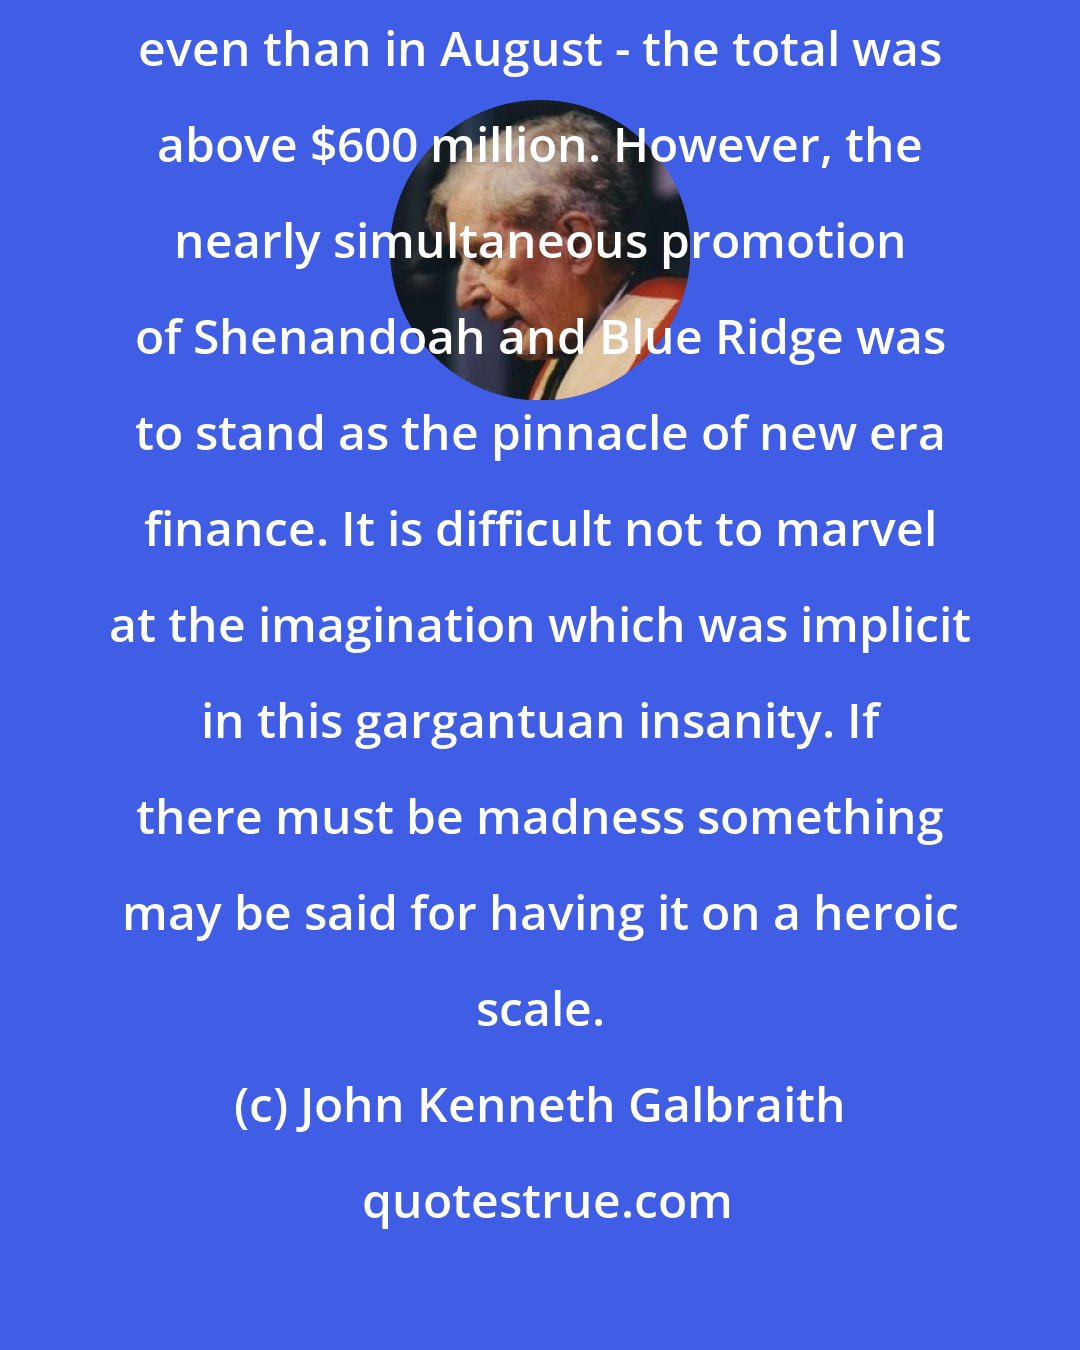 John Kenneth Galbraith: More investment trusts securities were offered in September of 1929 even than in August - the total was above $600 million. However, the nearly simultaneous promotion of Shenandoah and Blue Ridge was to stand as the pinnacle of new era finance. It is difficult not to marvel at the imagination which was implicit in this gargantuan insanity. If there must be madness something may be said for having it on a heroic scale.